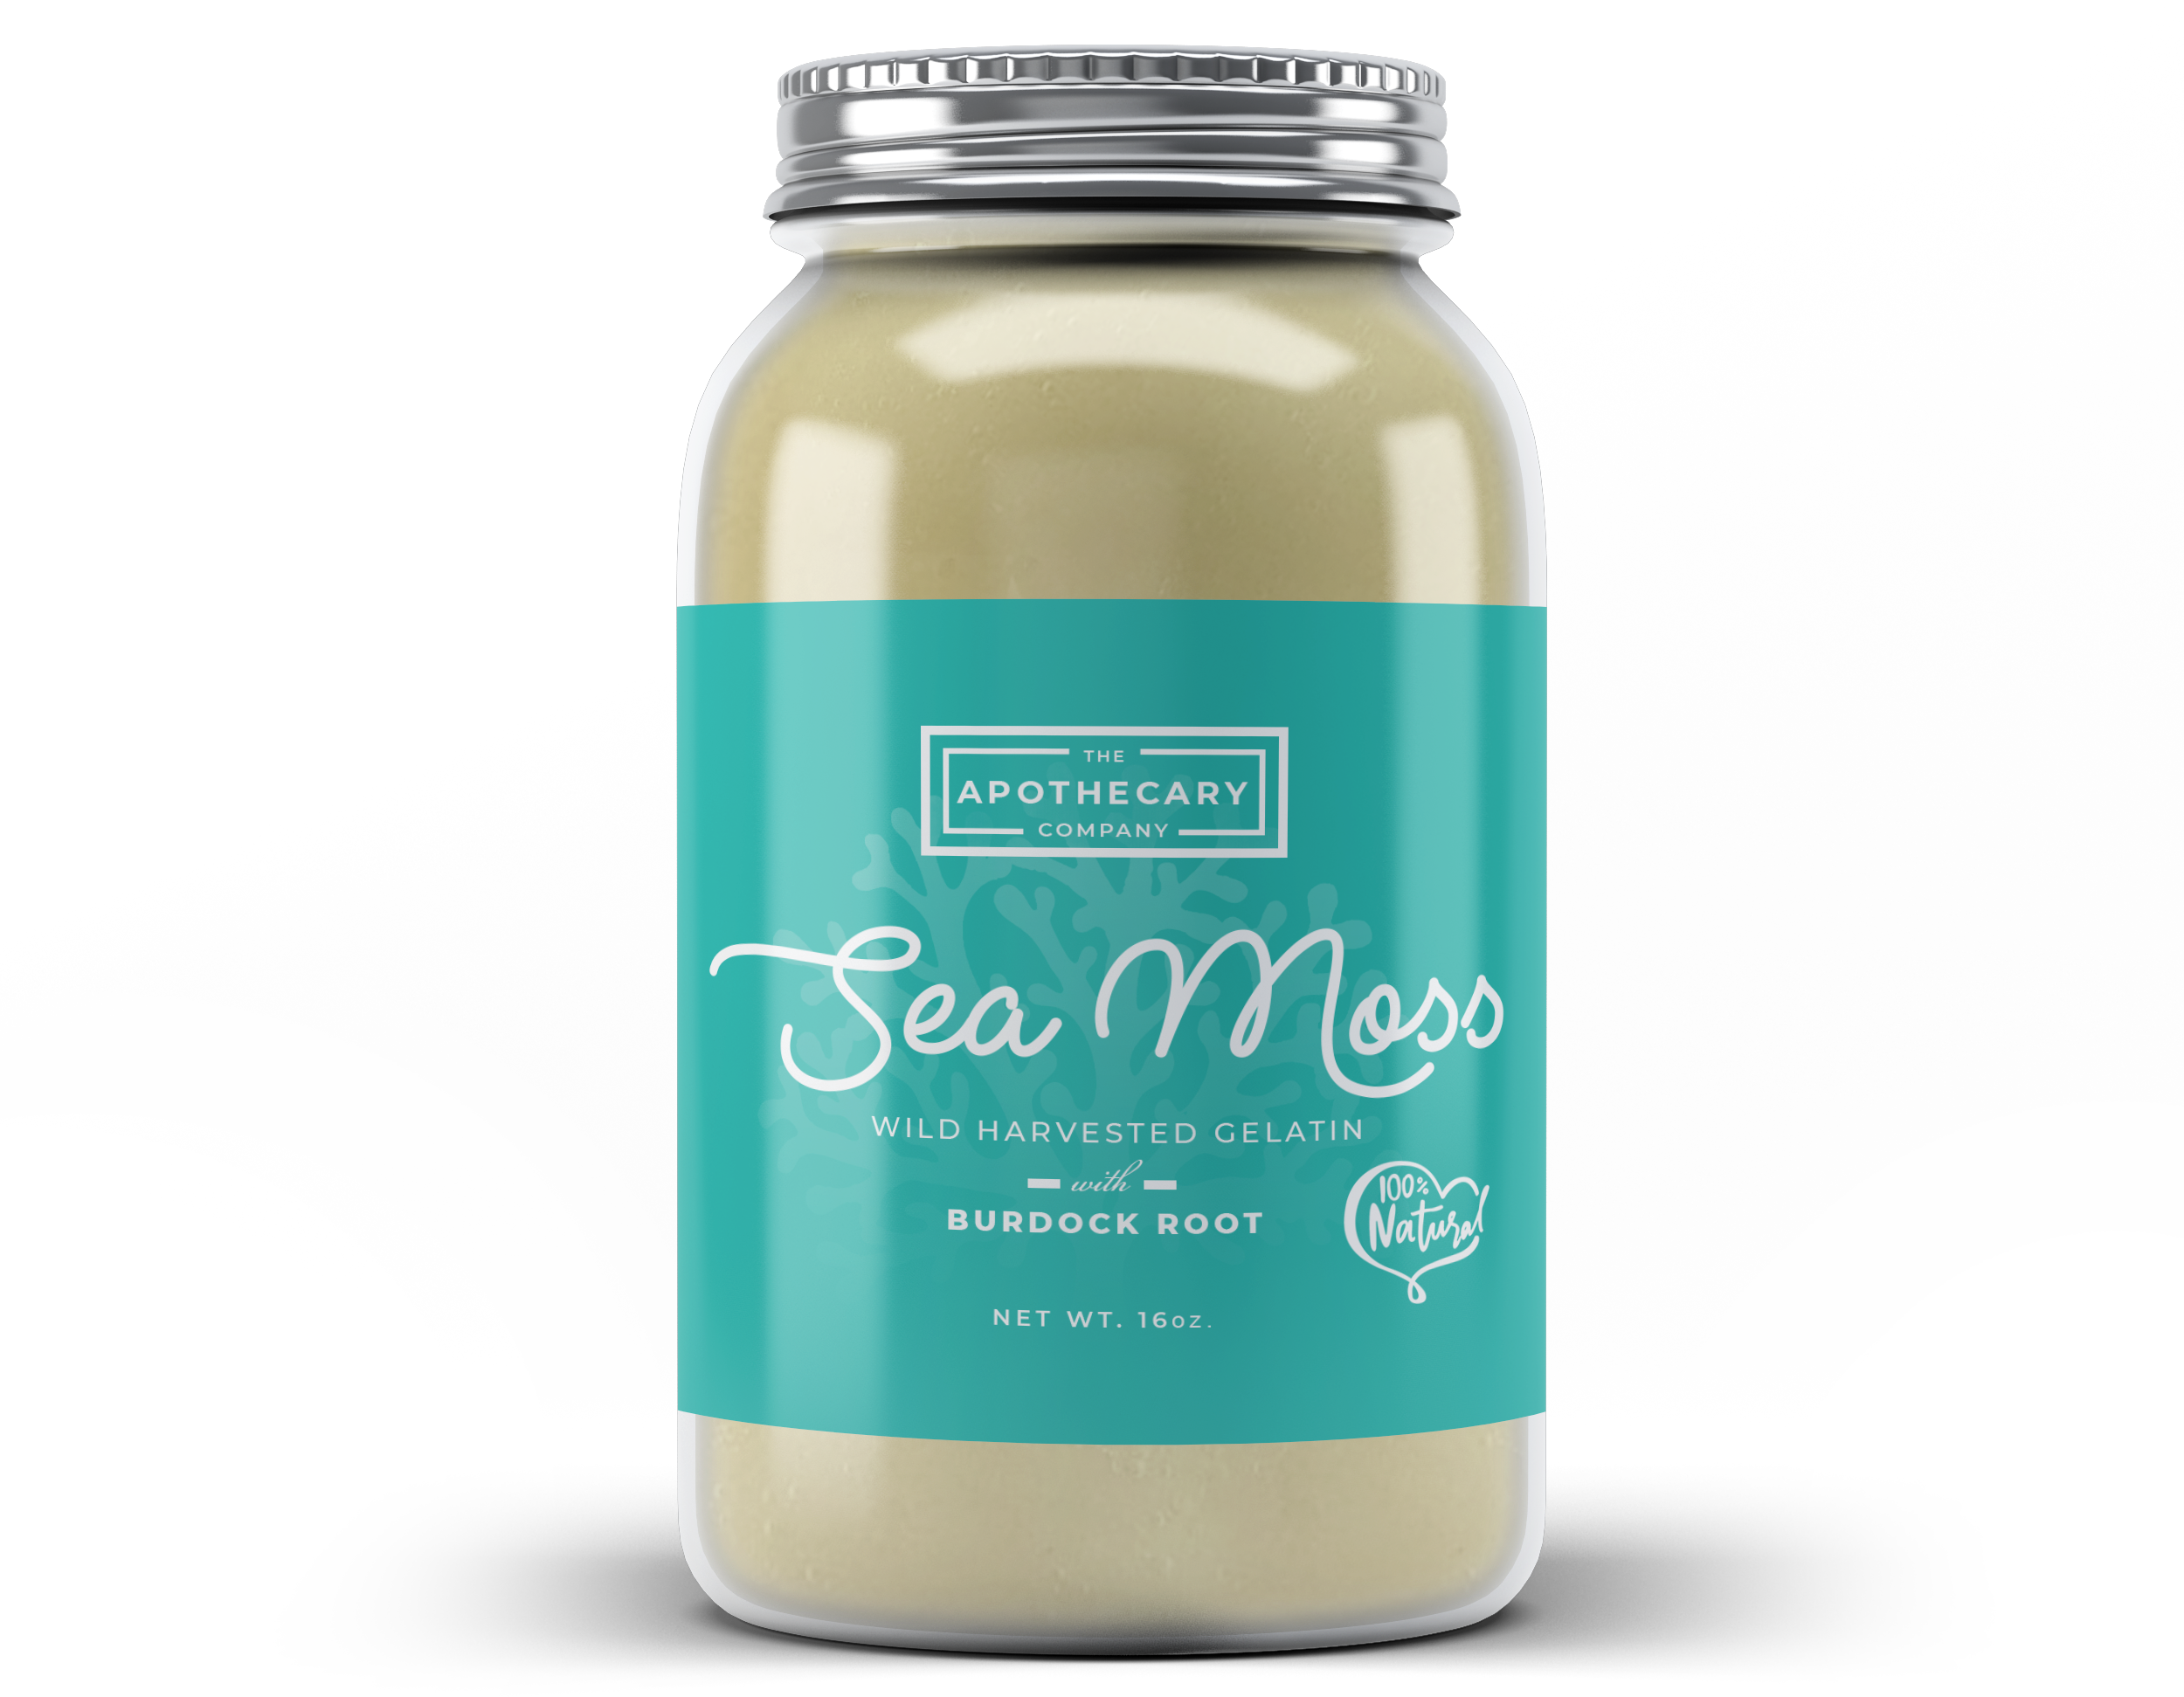 The Apothecary Co Sea Moss Gel